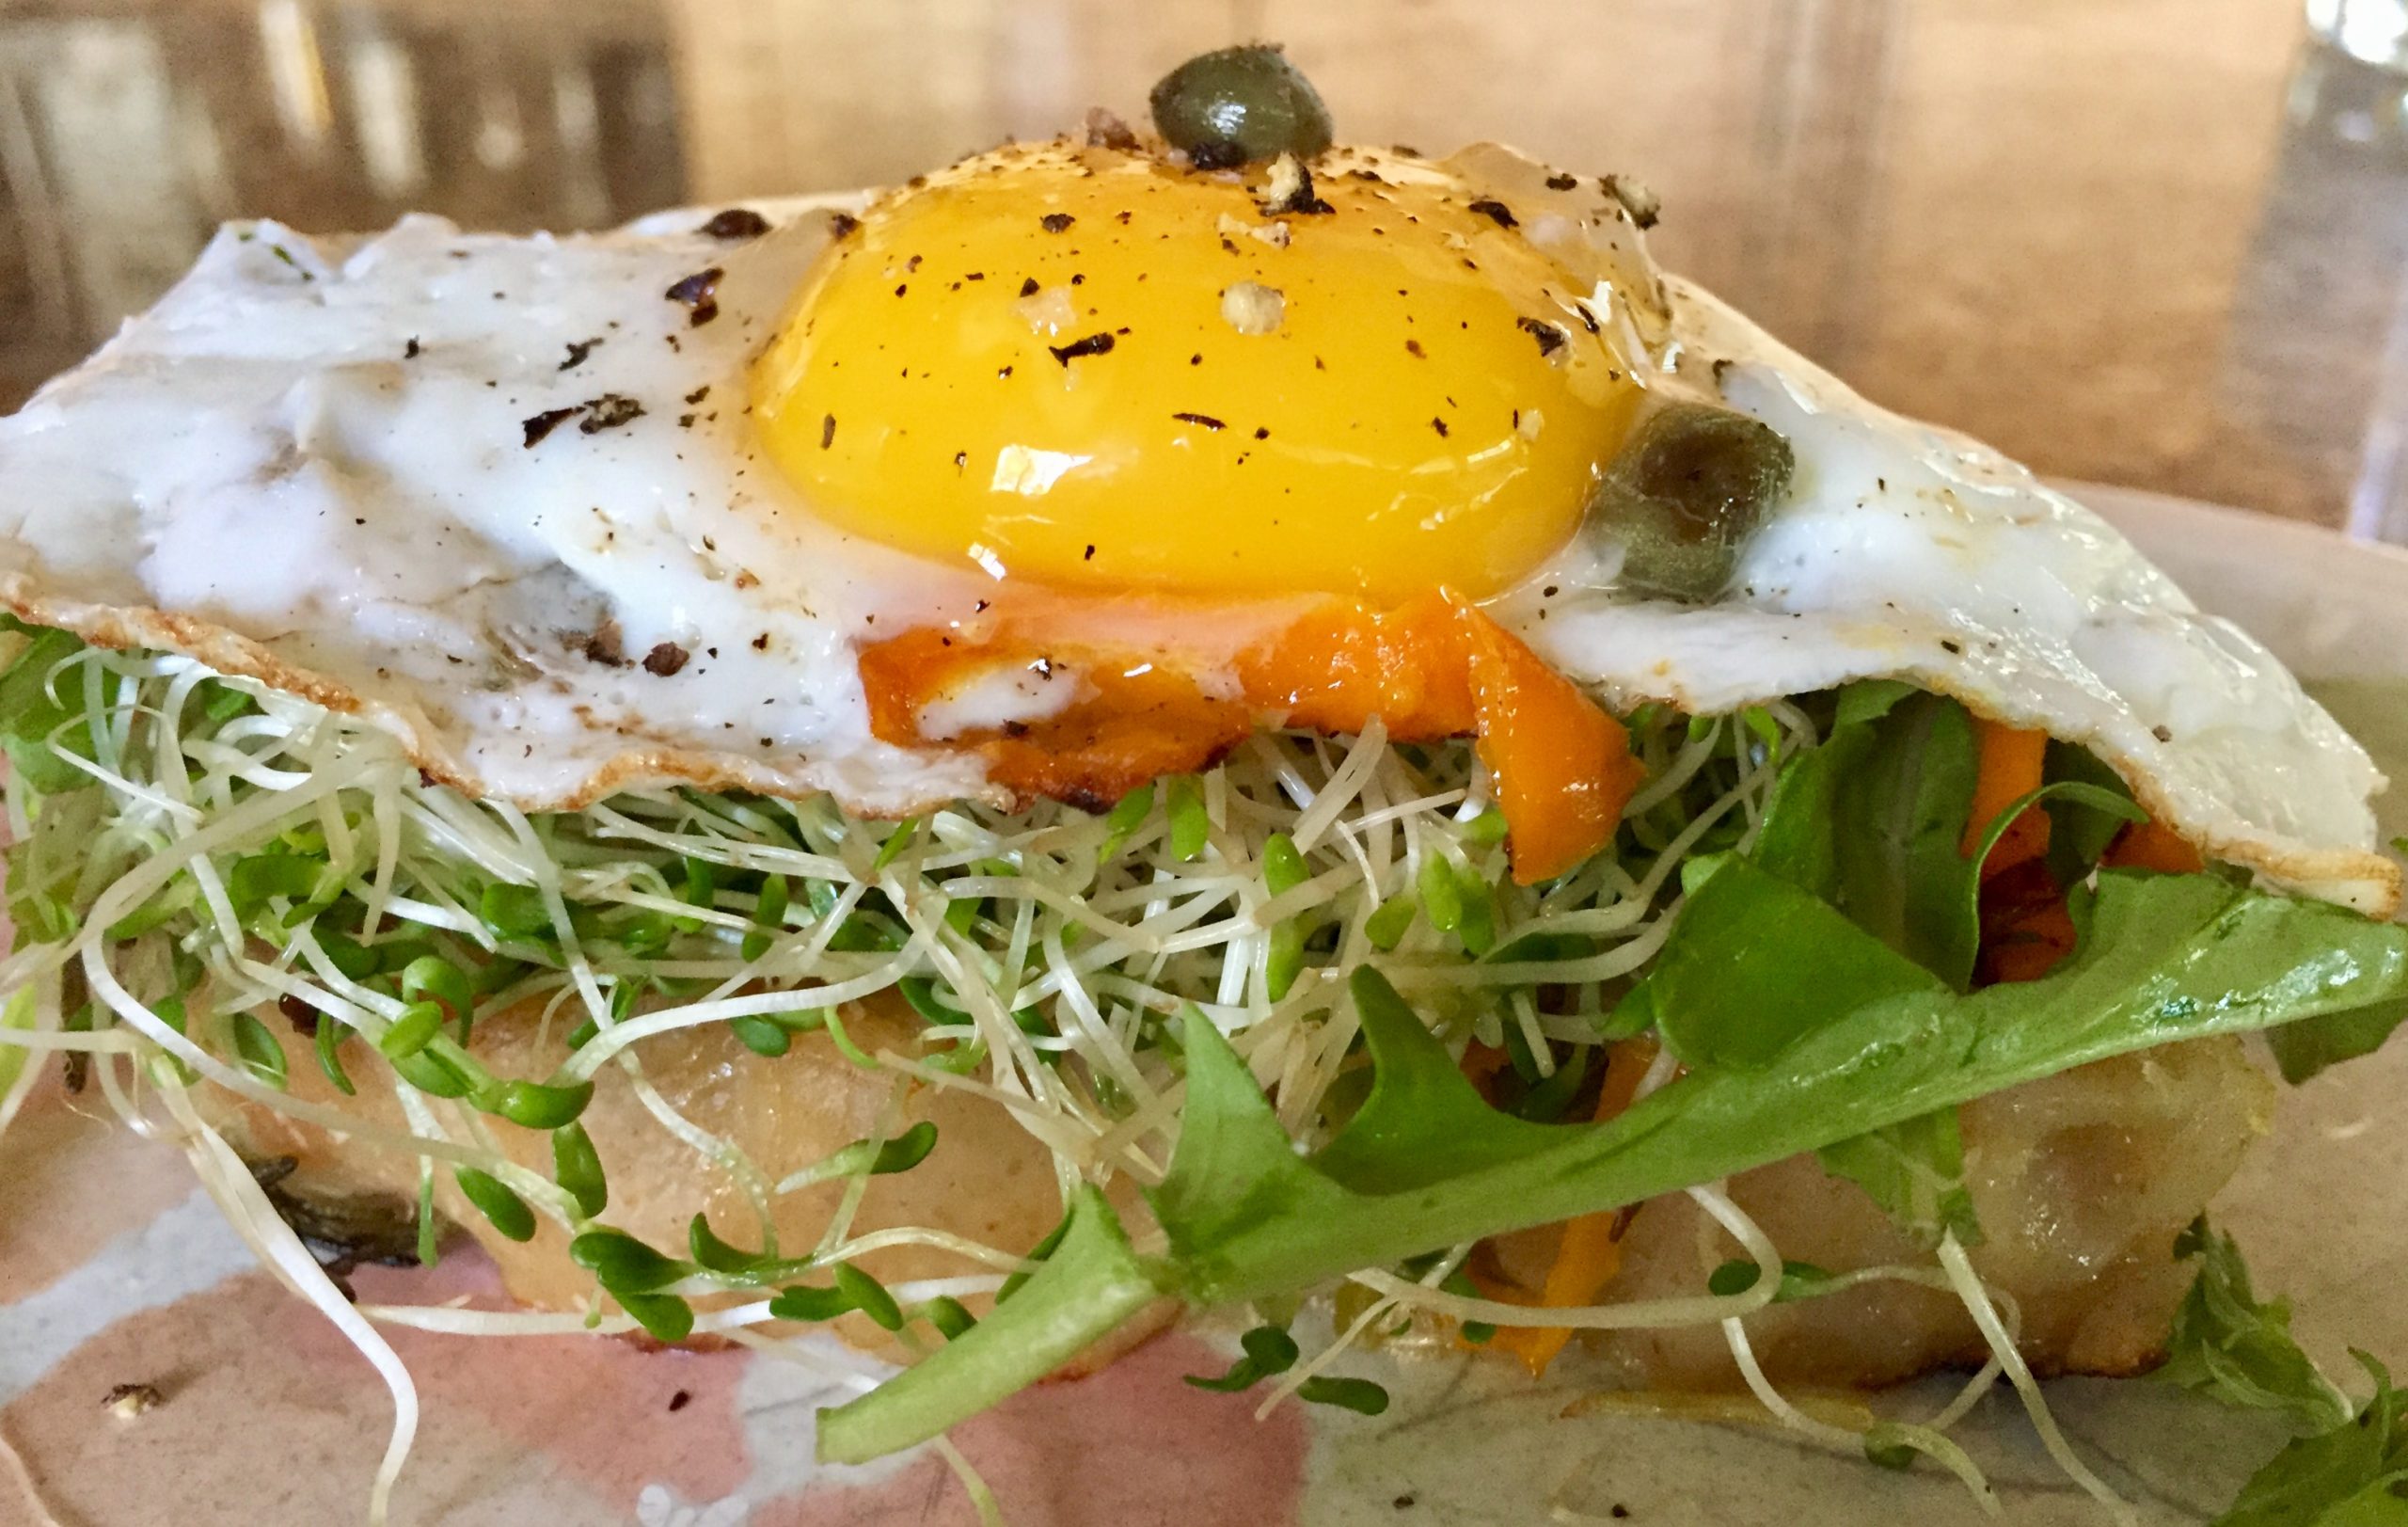 Thin slice focaccia with sprouts, arugula and egg